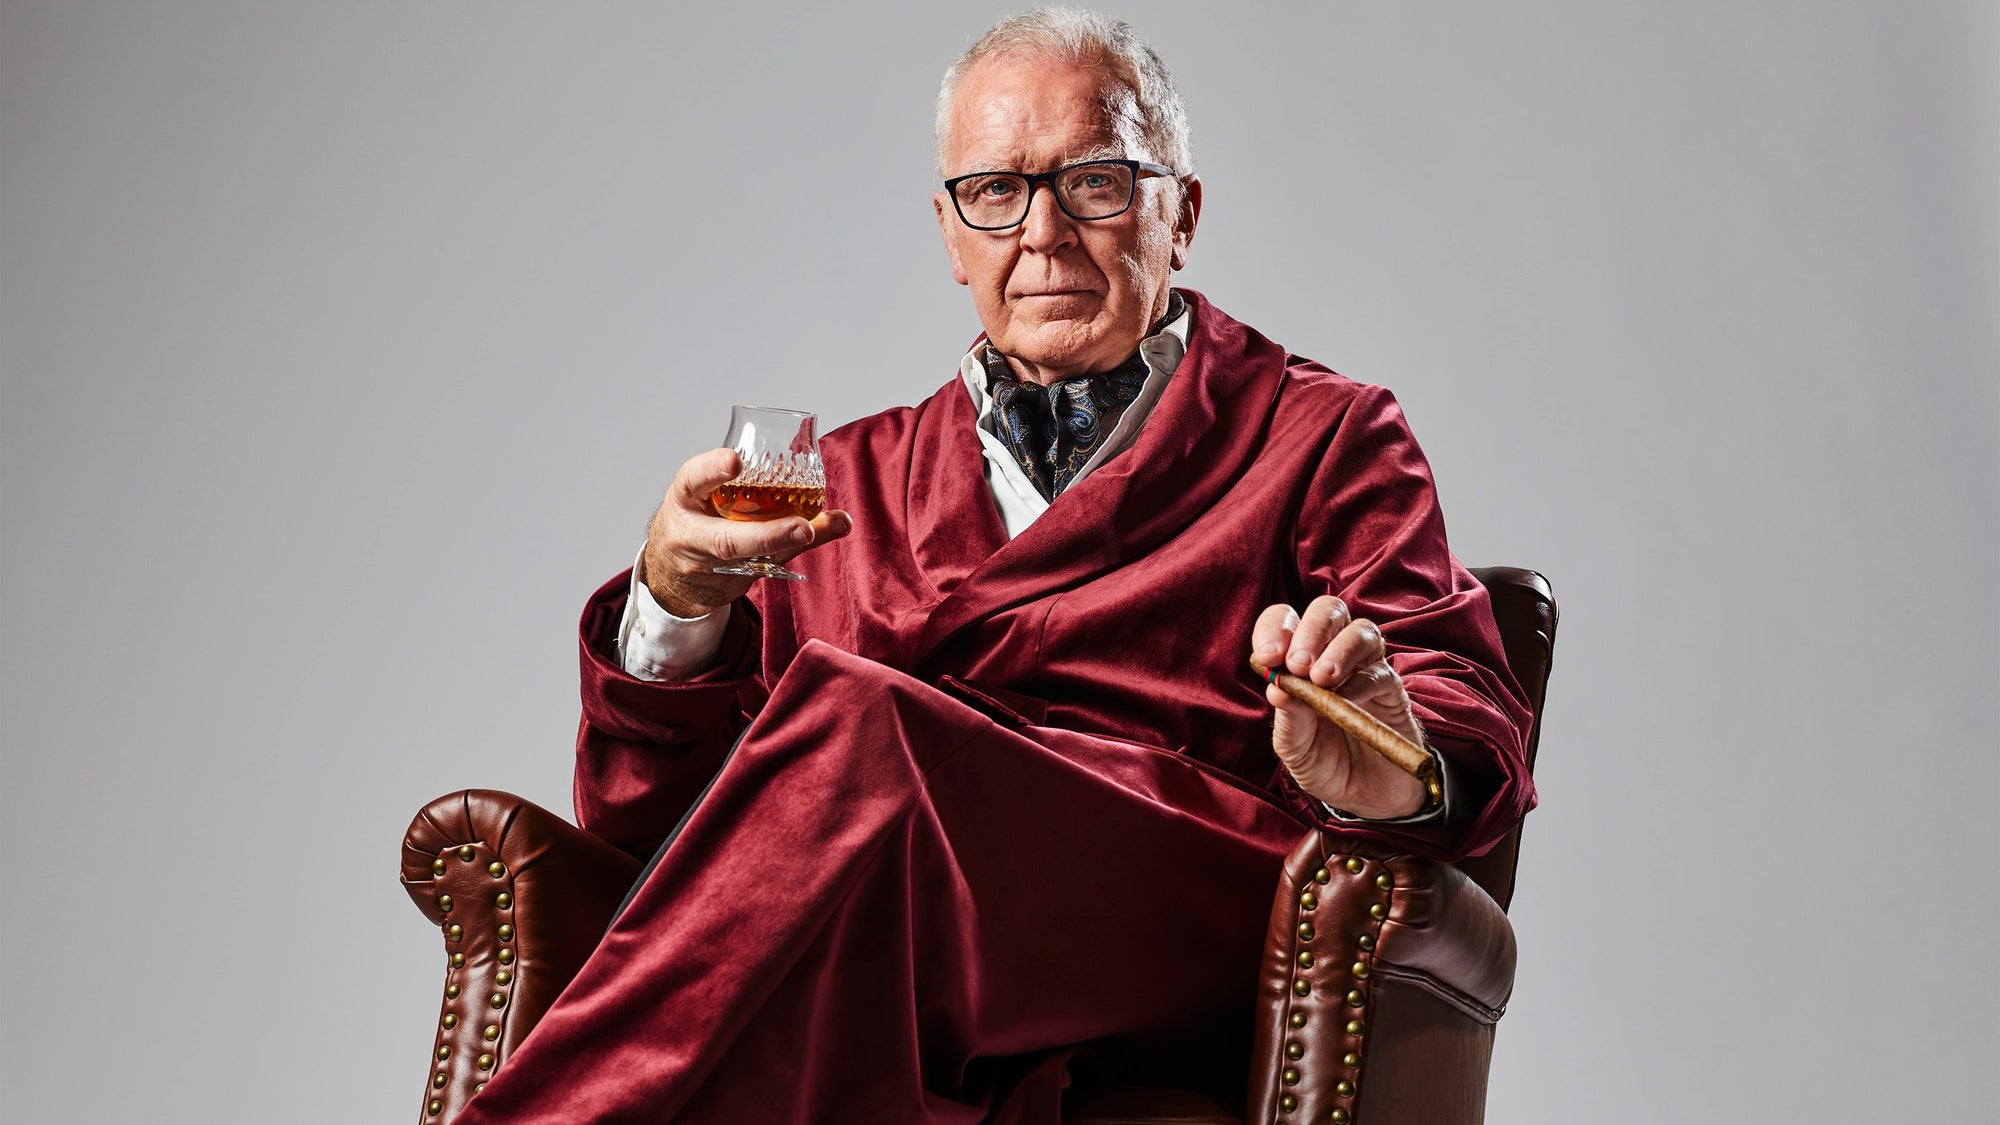 Executive Producer wearing an Enamoured Iris video production robe while holding a class of scotch and a cigar